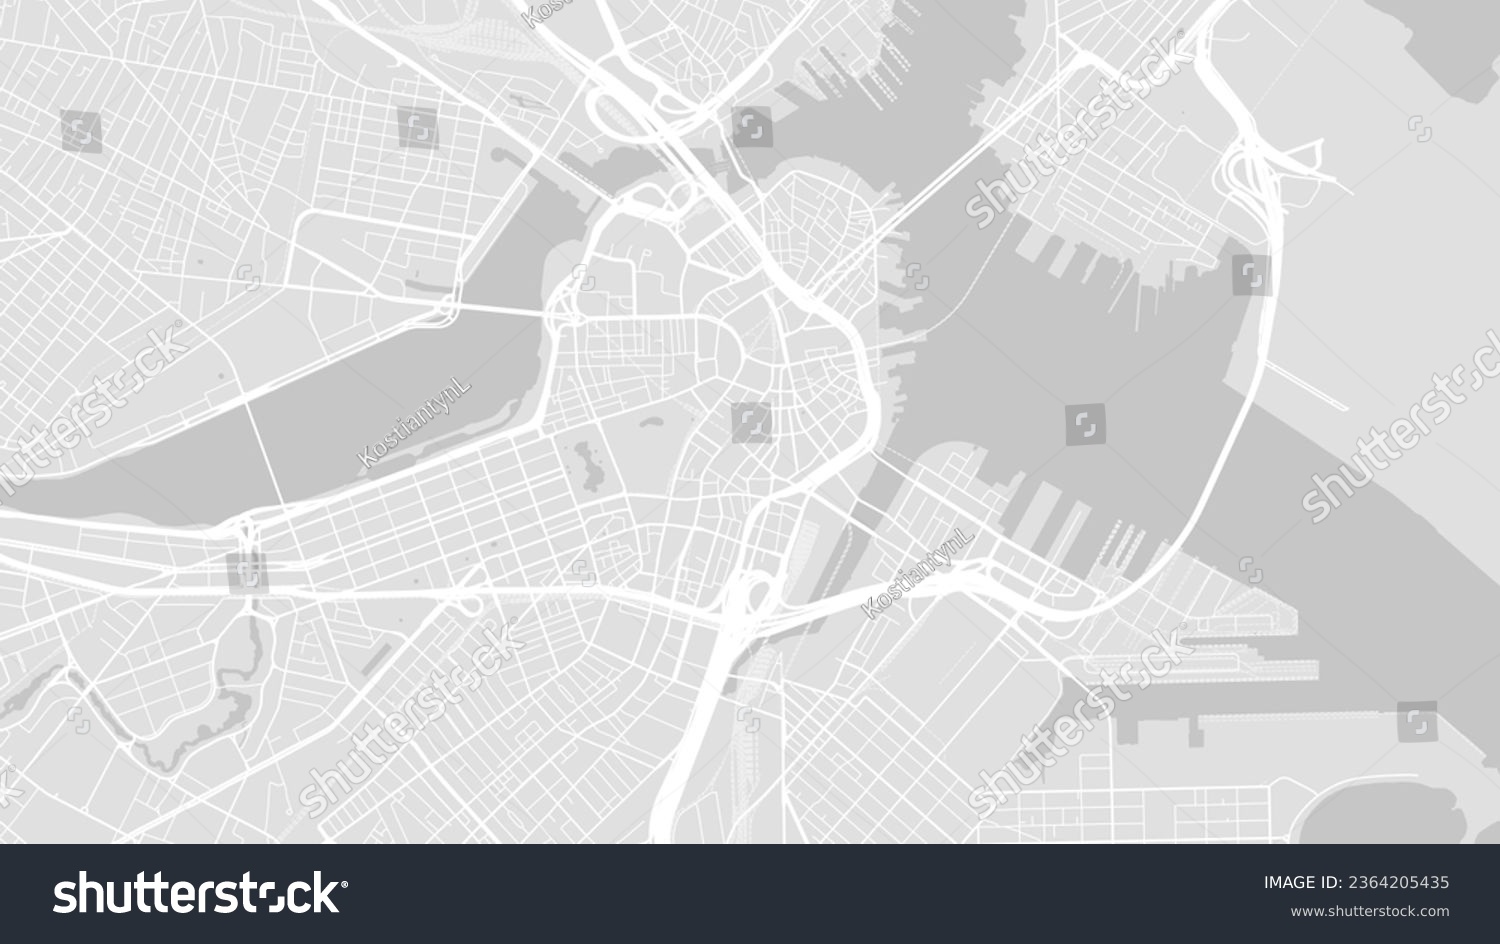 SVG of Background Boston map, United States, white and light grey city poster. Vector map with roads and water. Widescreen proportion, digital flat design roadmap. svg